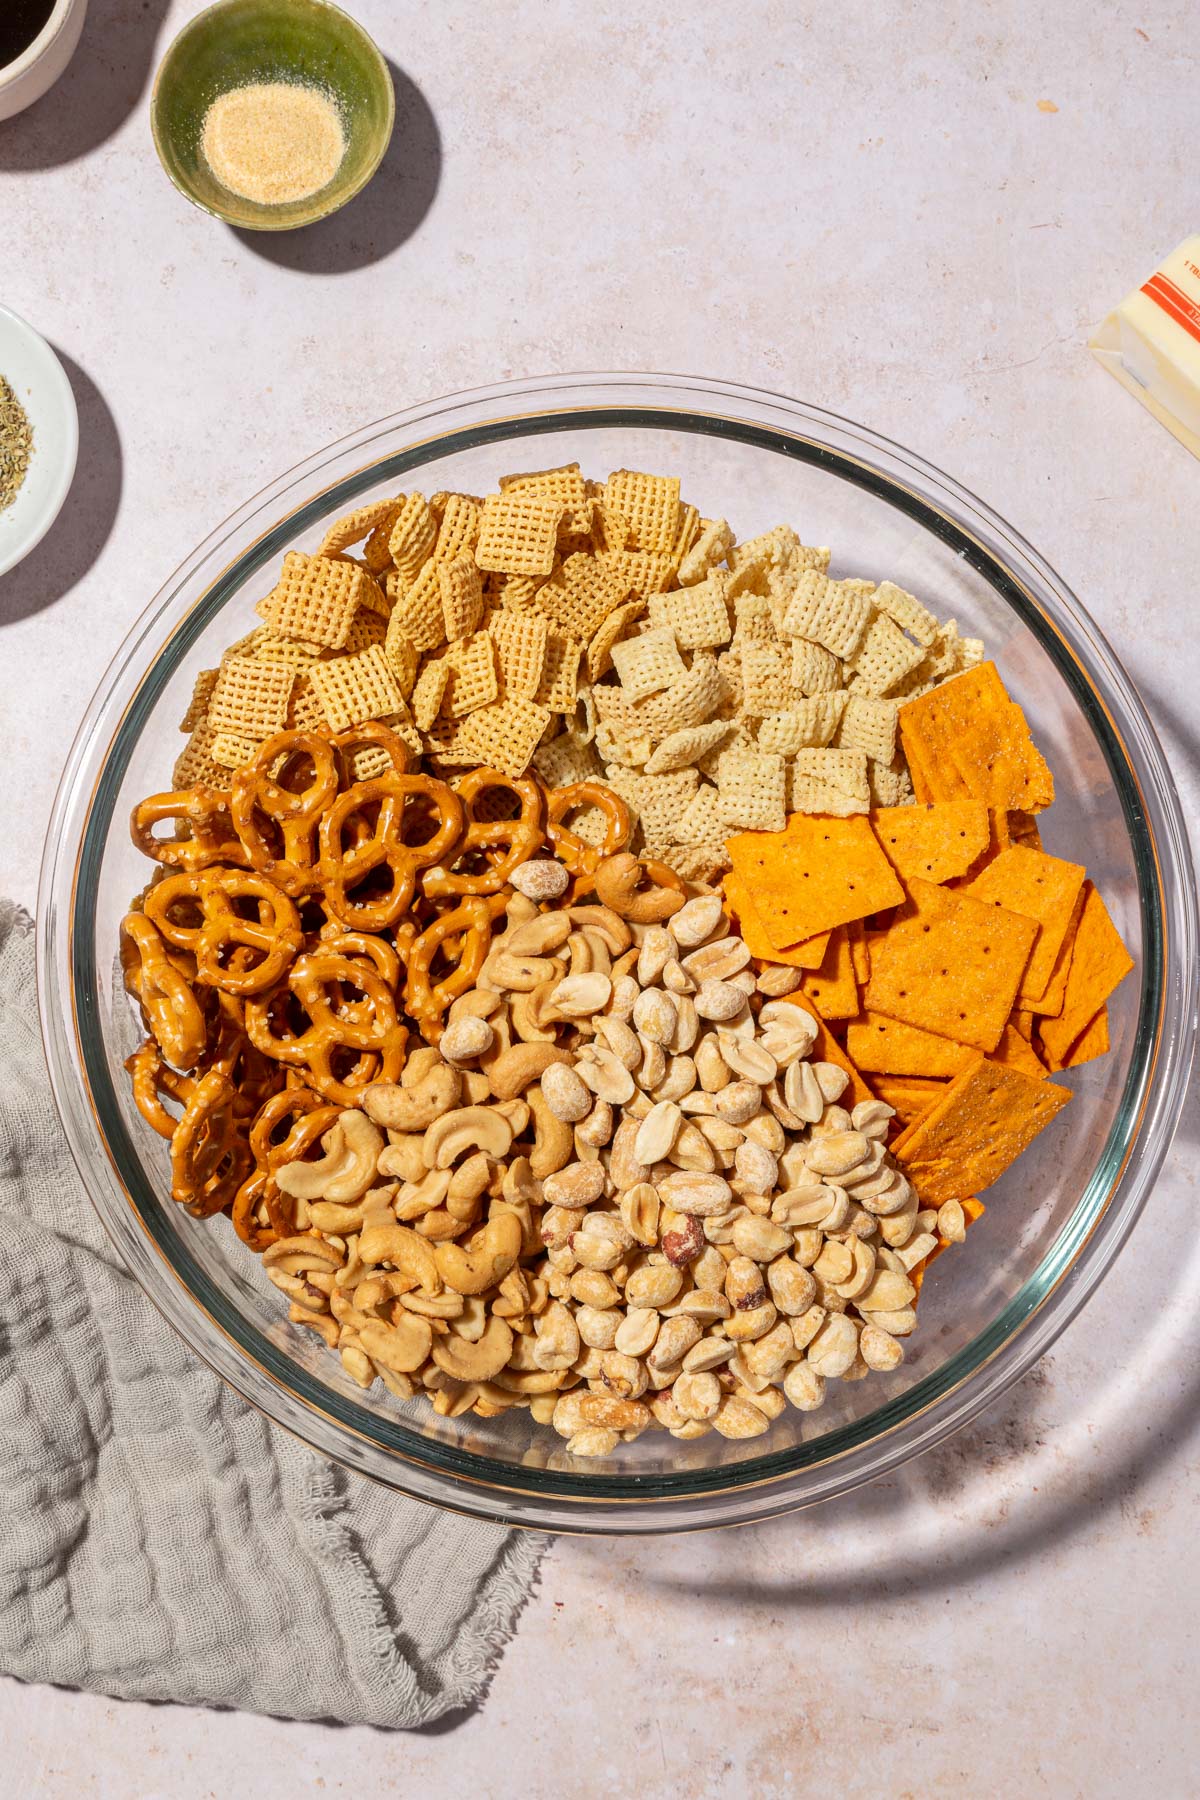 A glass mixing bowl with gluten-free pretzels, rice chex cereal, corn chex cereal, gluten-free cheese crackers, cashews and peanuts in it.